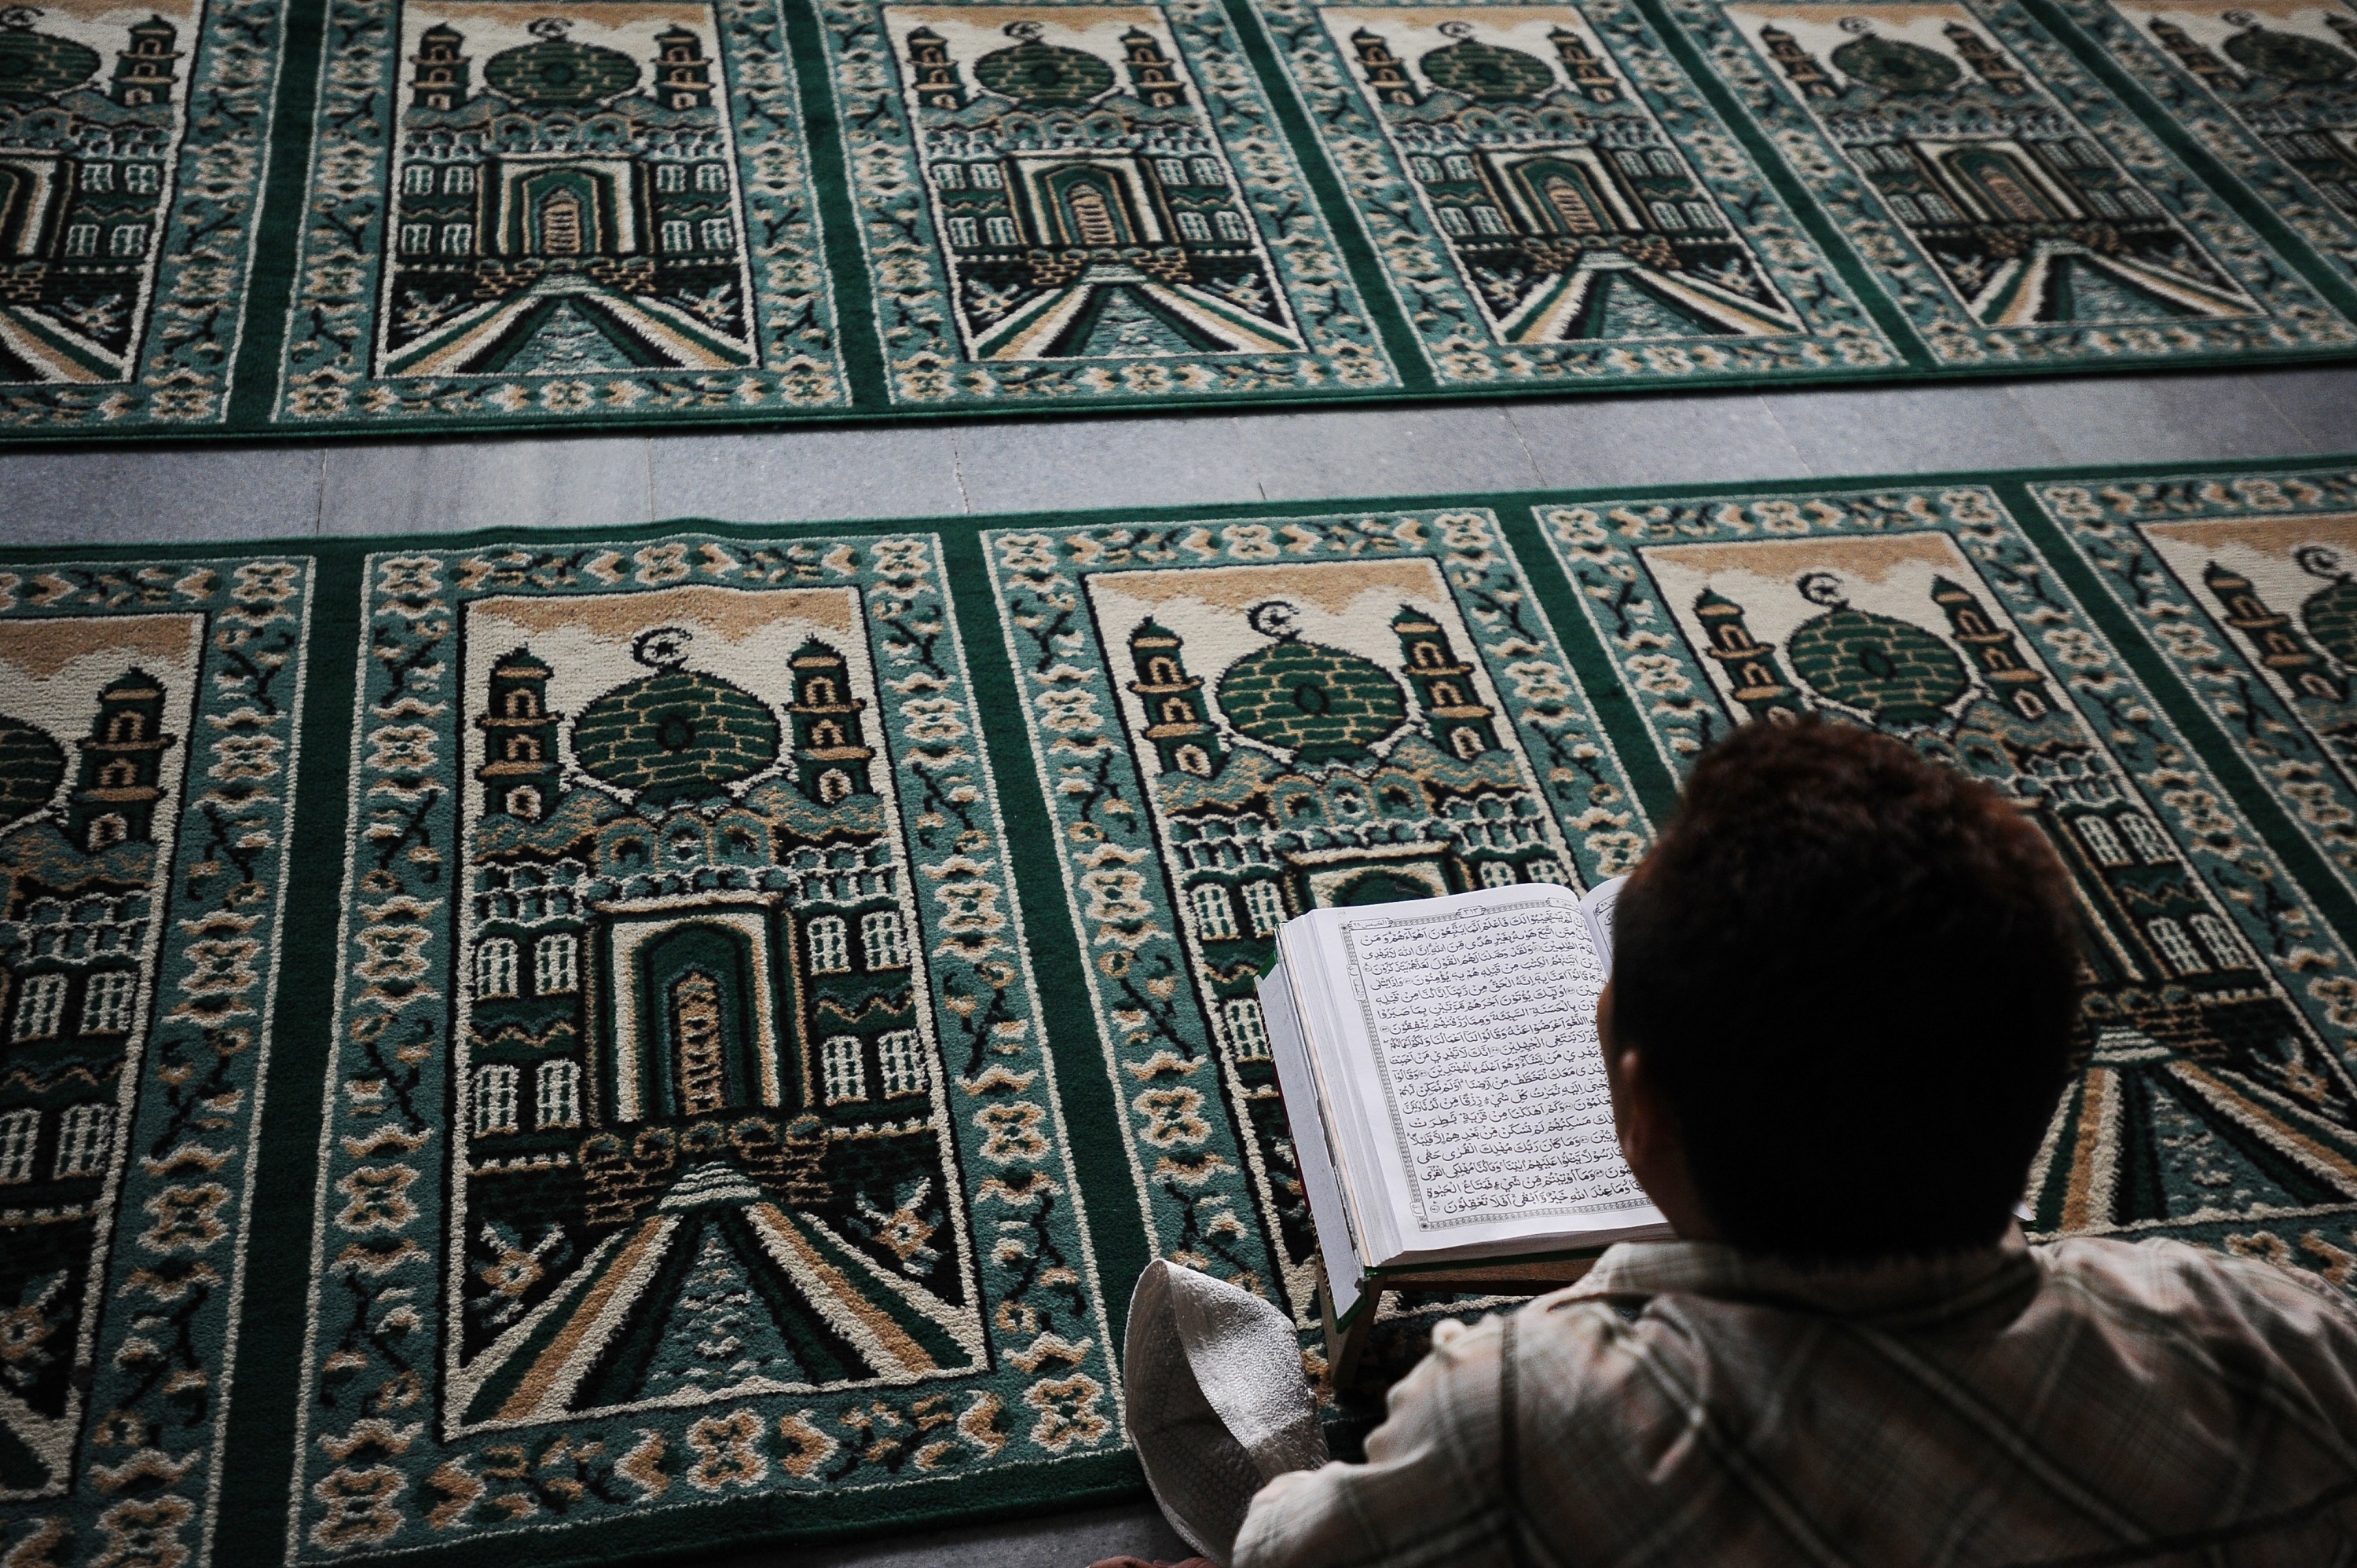 A Muslim man reads the Quran as he waits for the breaking of the fast during Ramadan on July 13, 2014 in Surabaya, Indonesia. (Robertus Pudyanto&mdash;Getty Images)